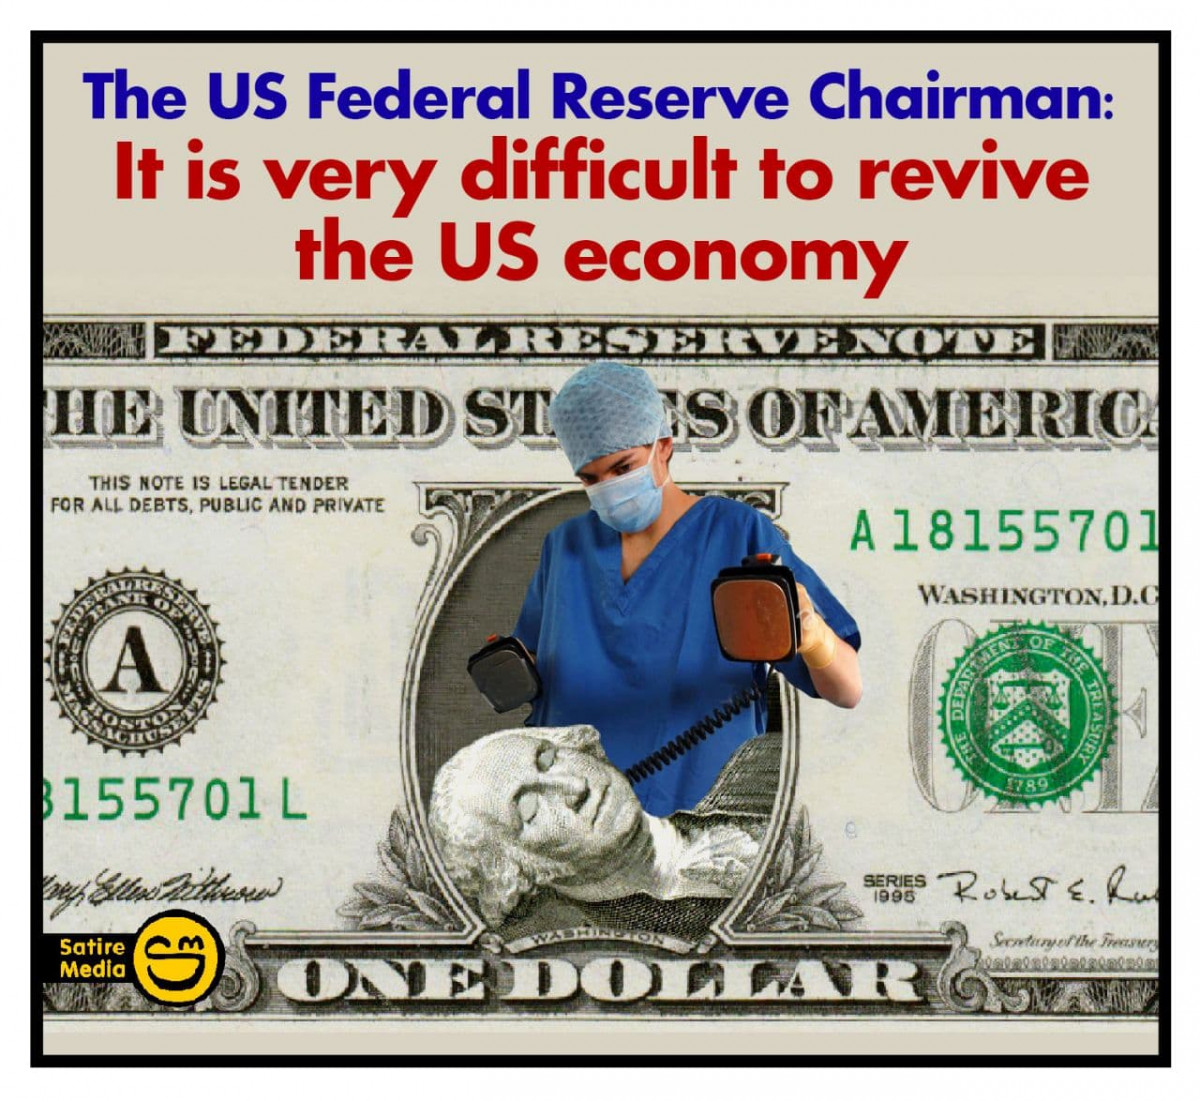 The US Federal Reserve Chairman: It is very difficult to revive the US economy